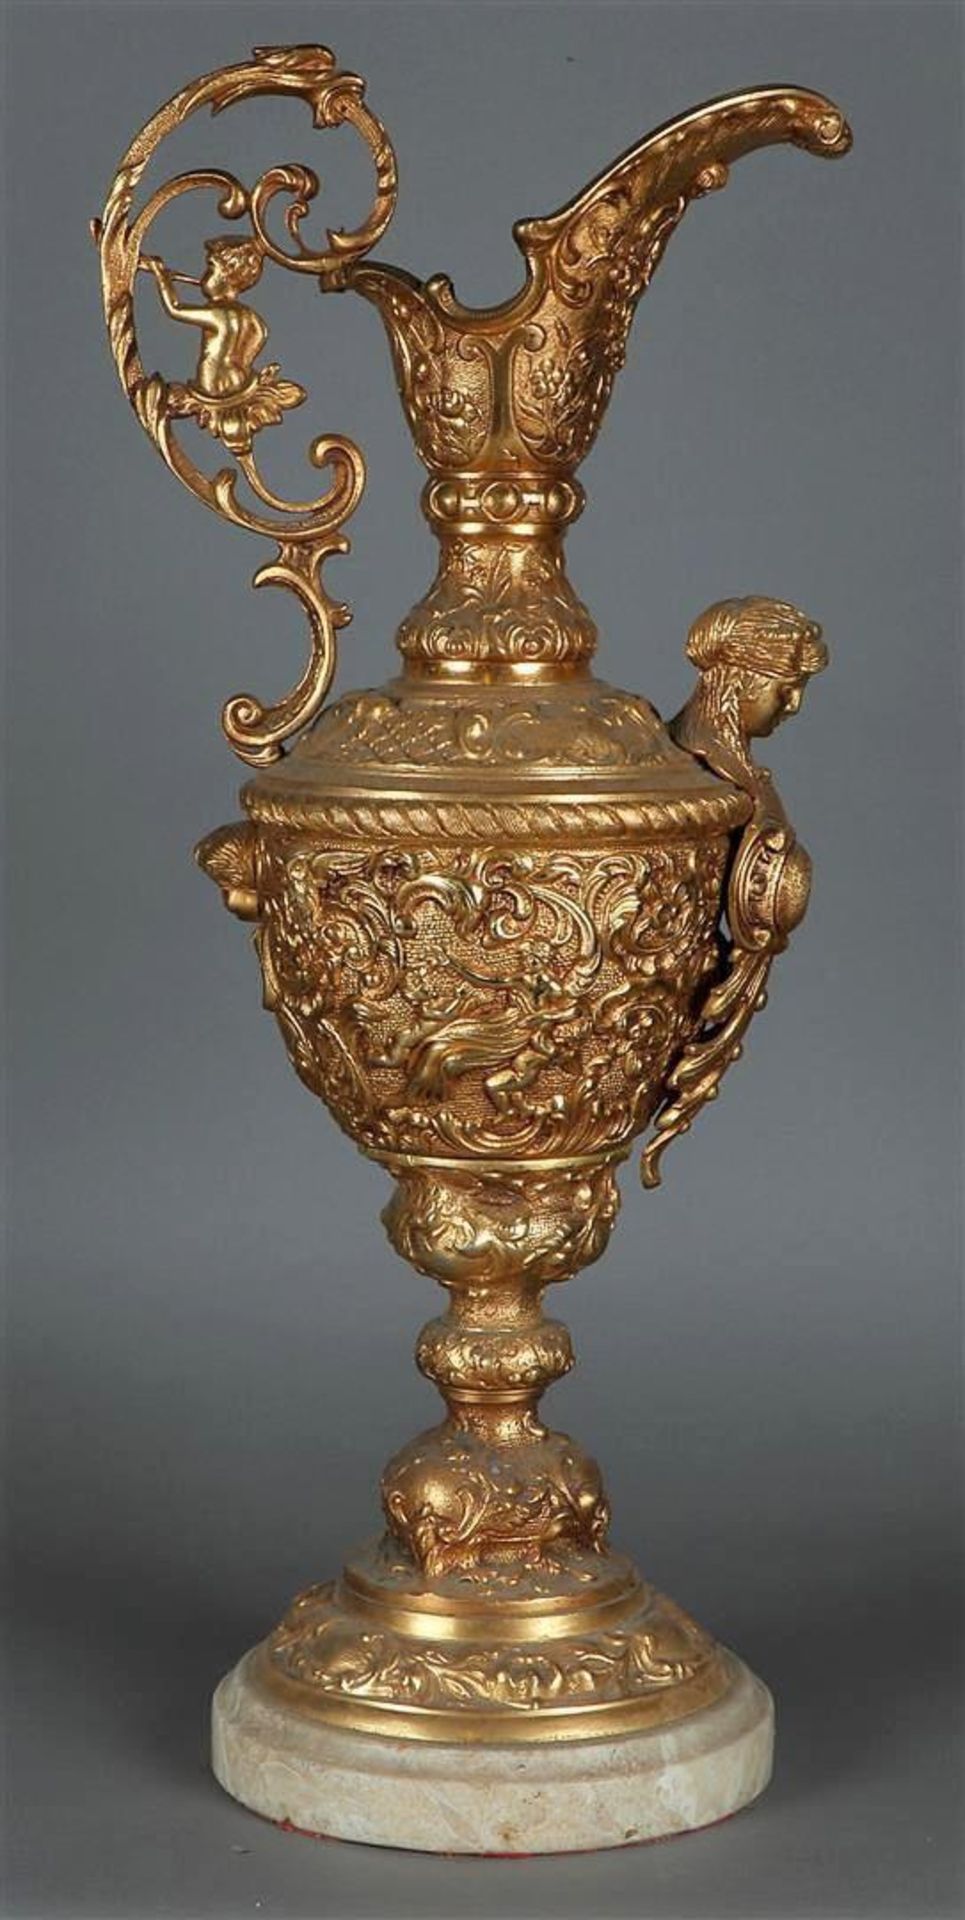 A large richly decorated bronze wine jug on a marble base. France, 19th century.